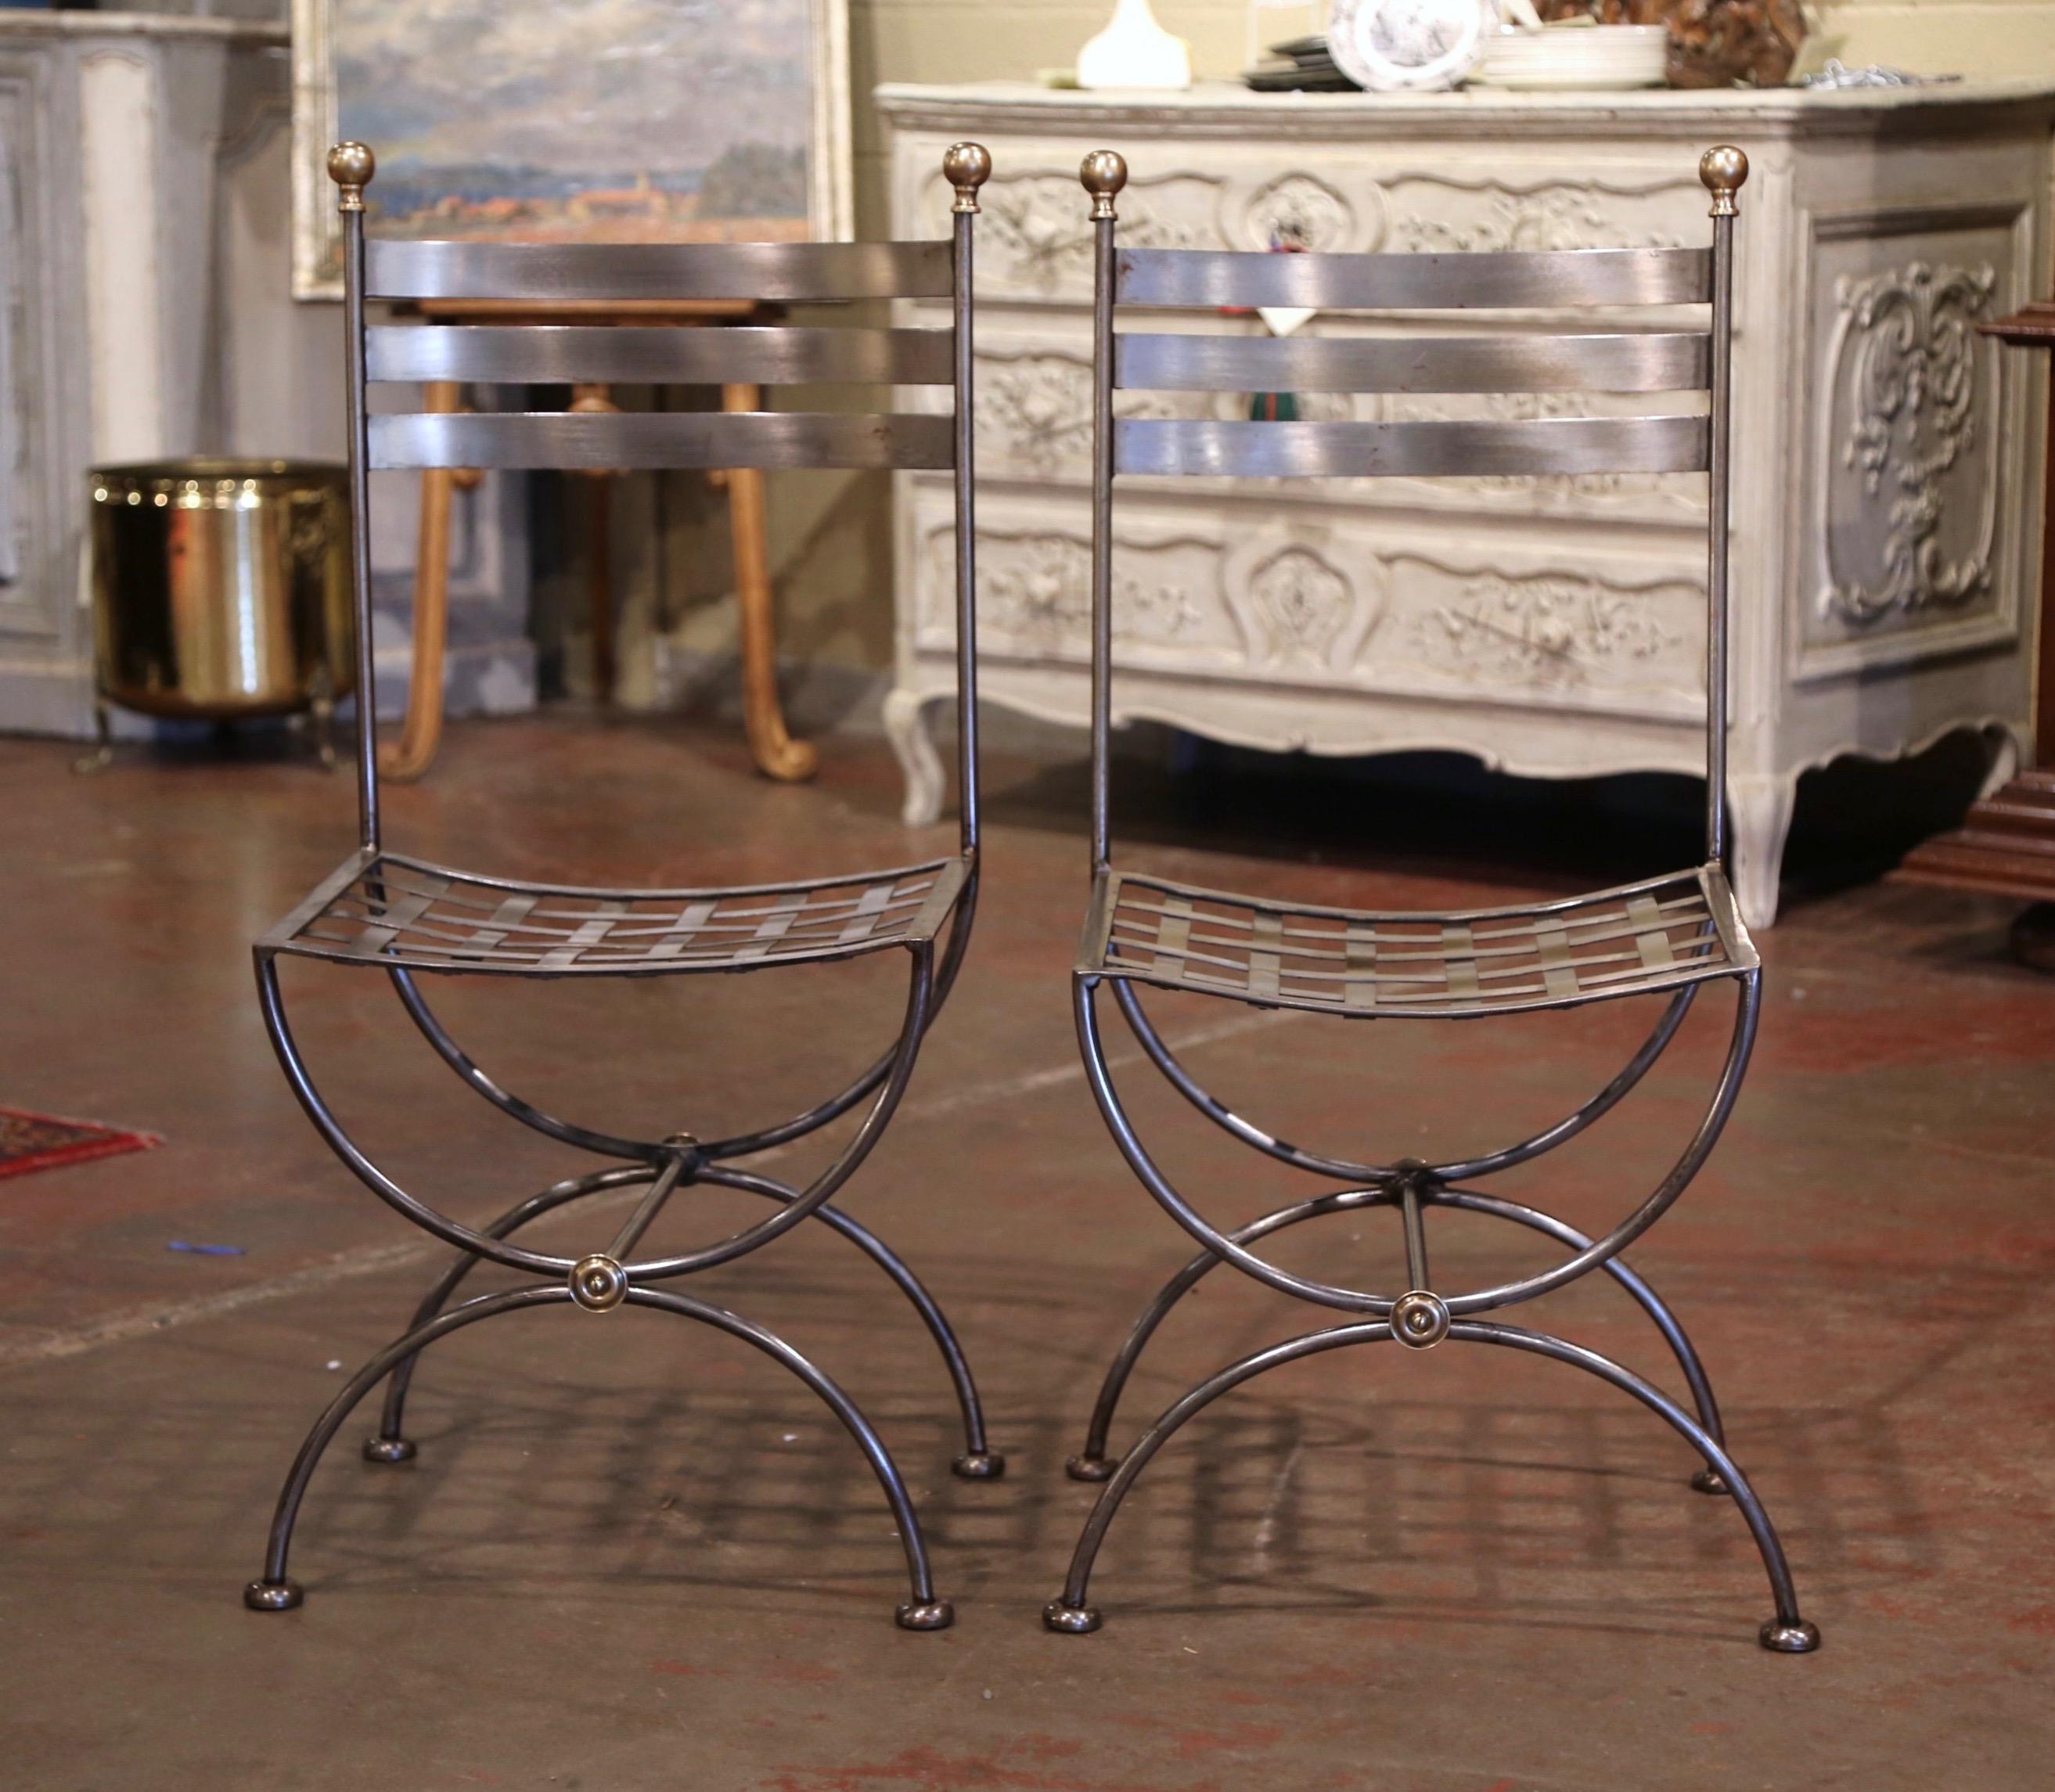 Place these two vintage chairs around a bistrot table, or outside on a patio! Crafted in France circa 1980 and made of wrought iron, each chair stands on forged Dagobert (or Curule) legs and features three curved ladders on the back, embellished